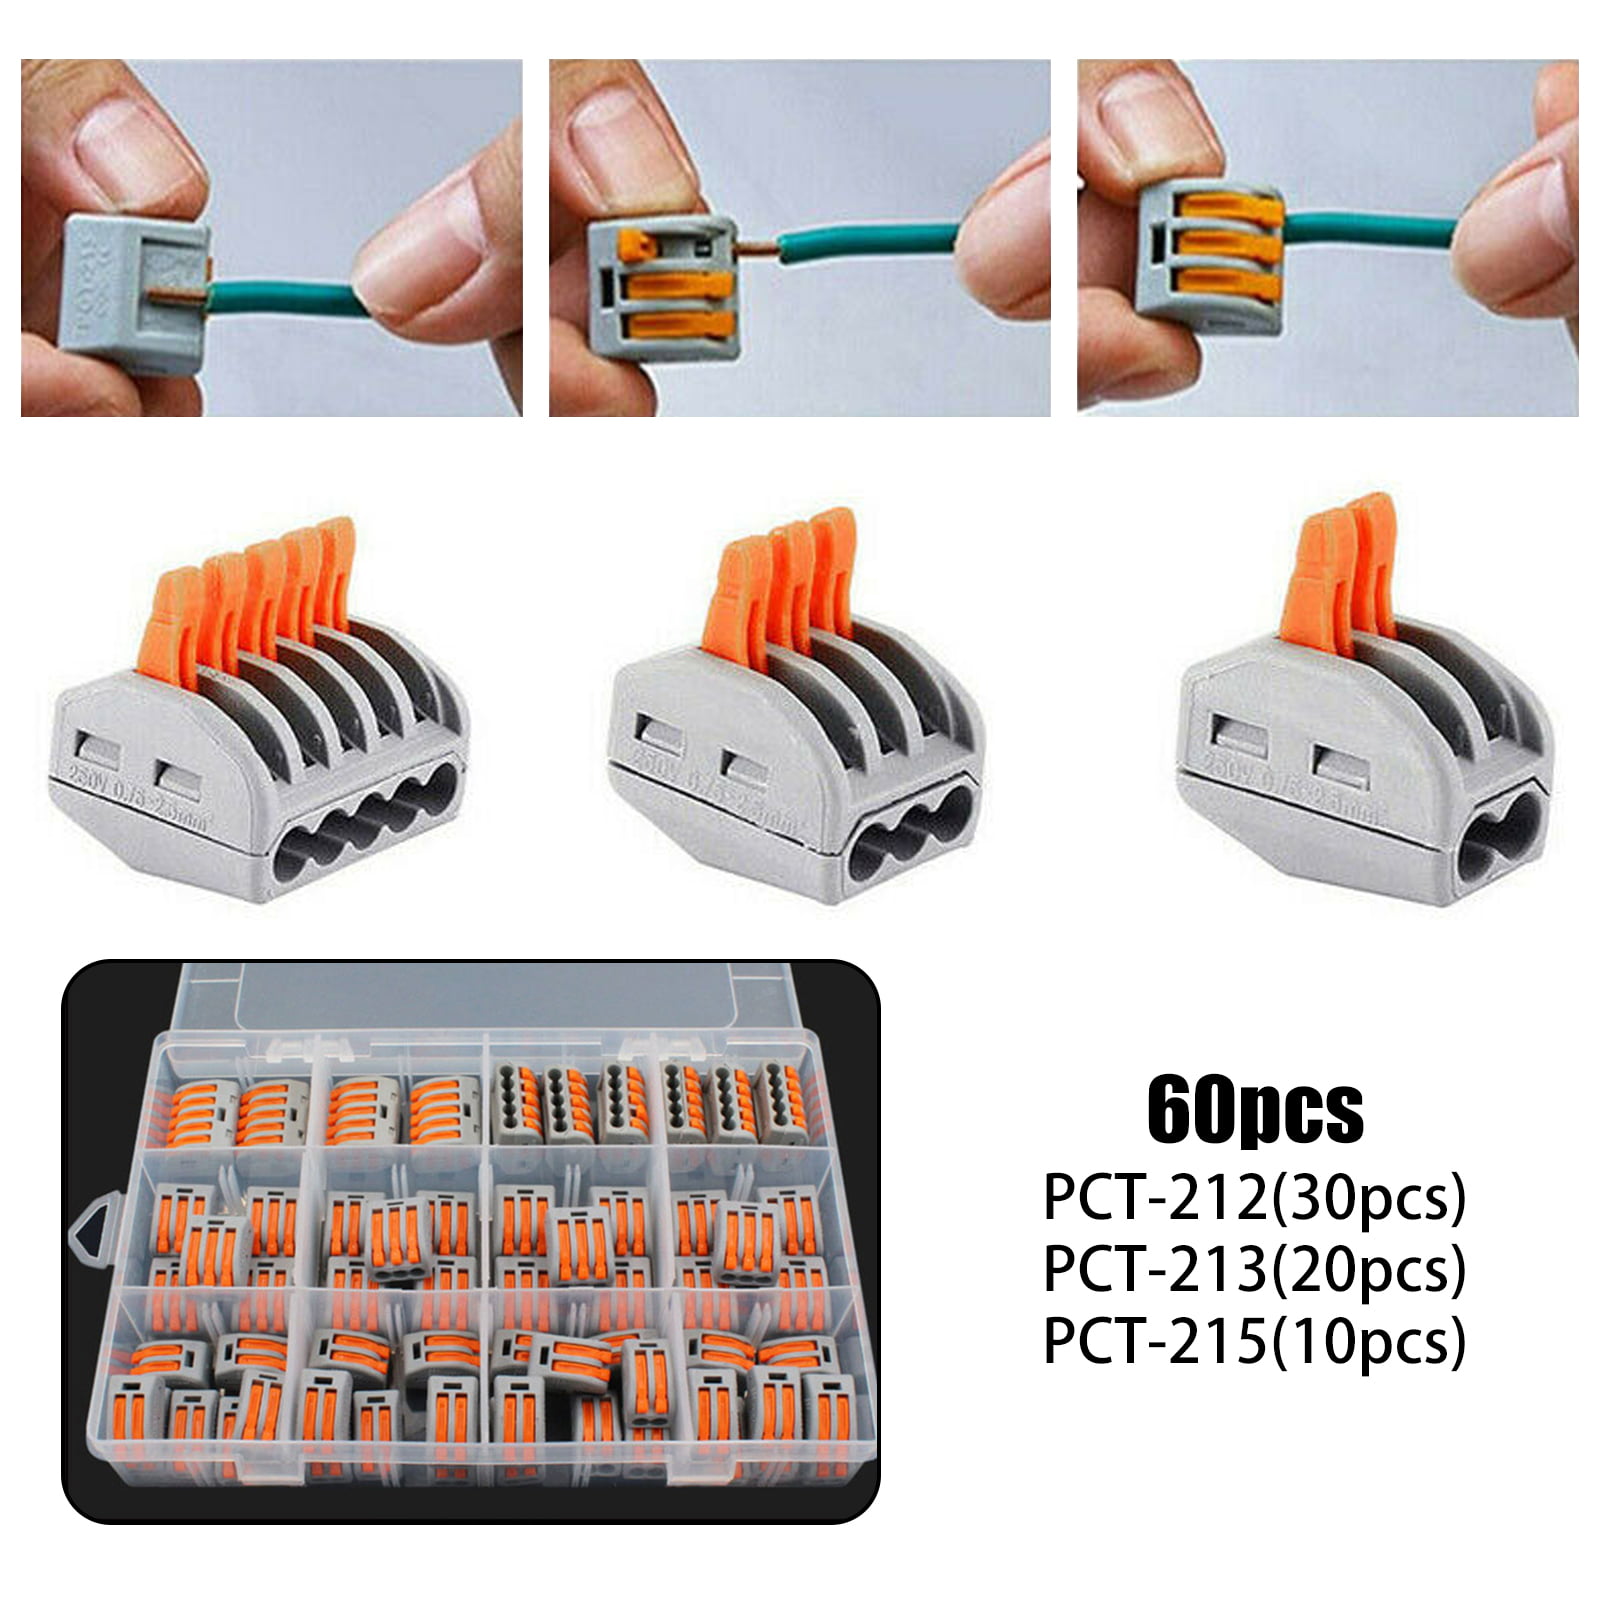 60pcs Electric Cable Wire connector Spring Lever Terminal Block Reusable 2/3/5 